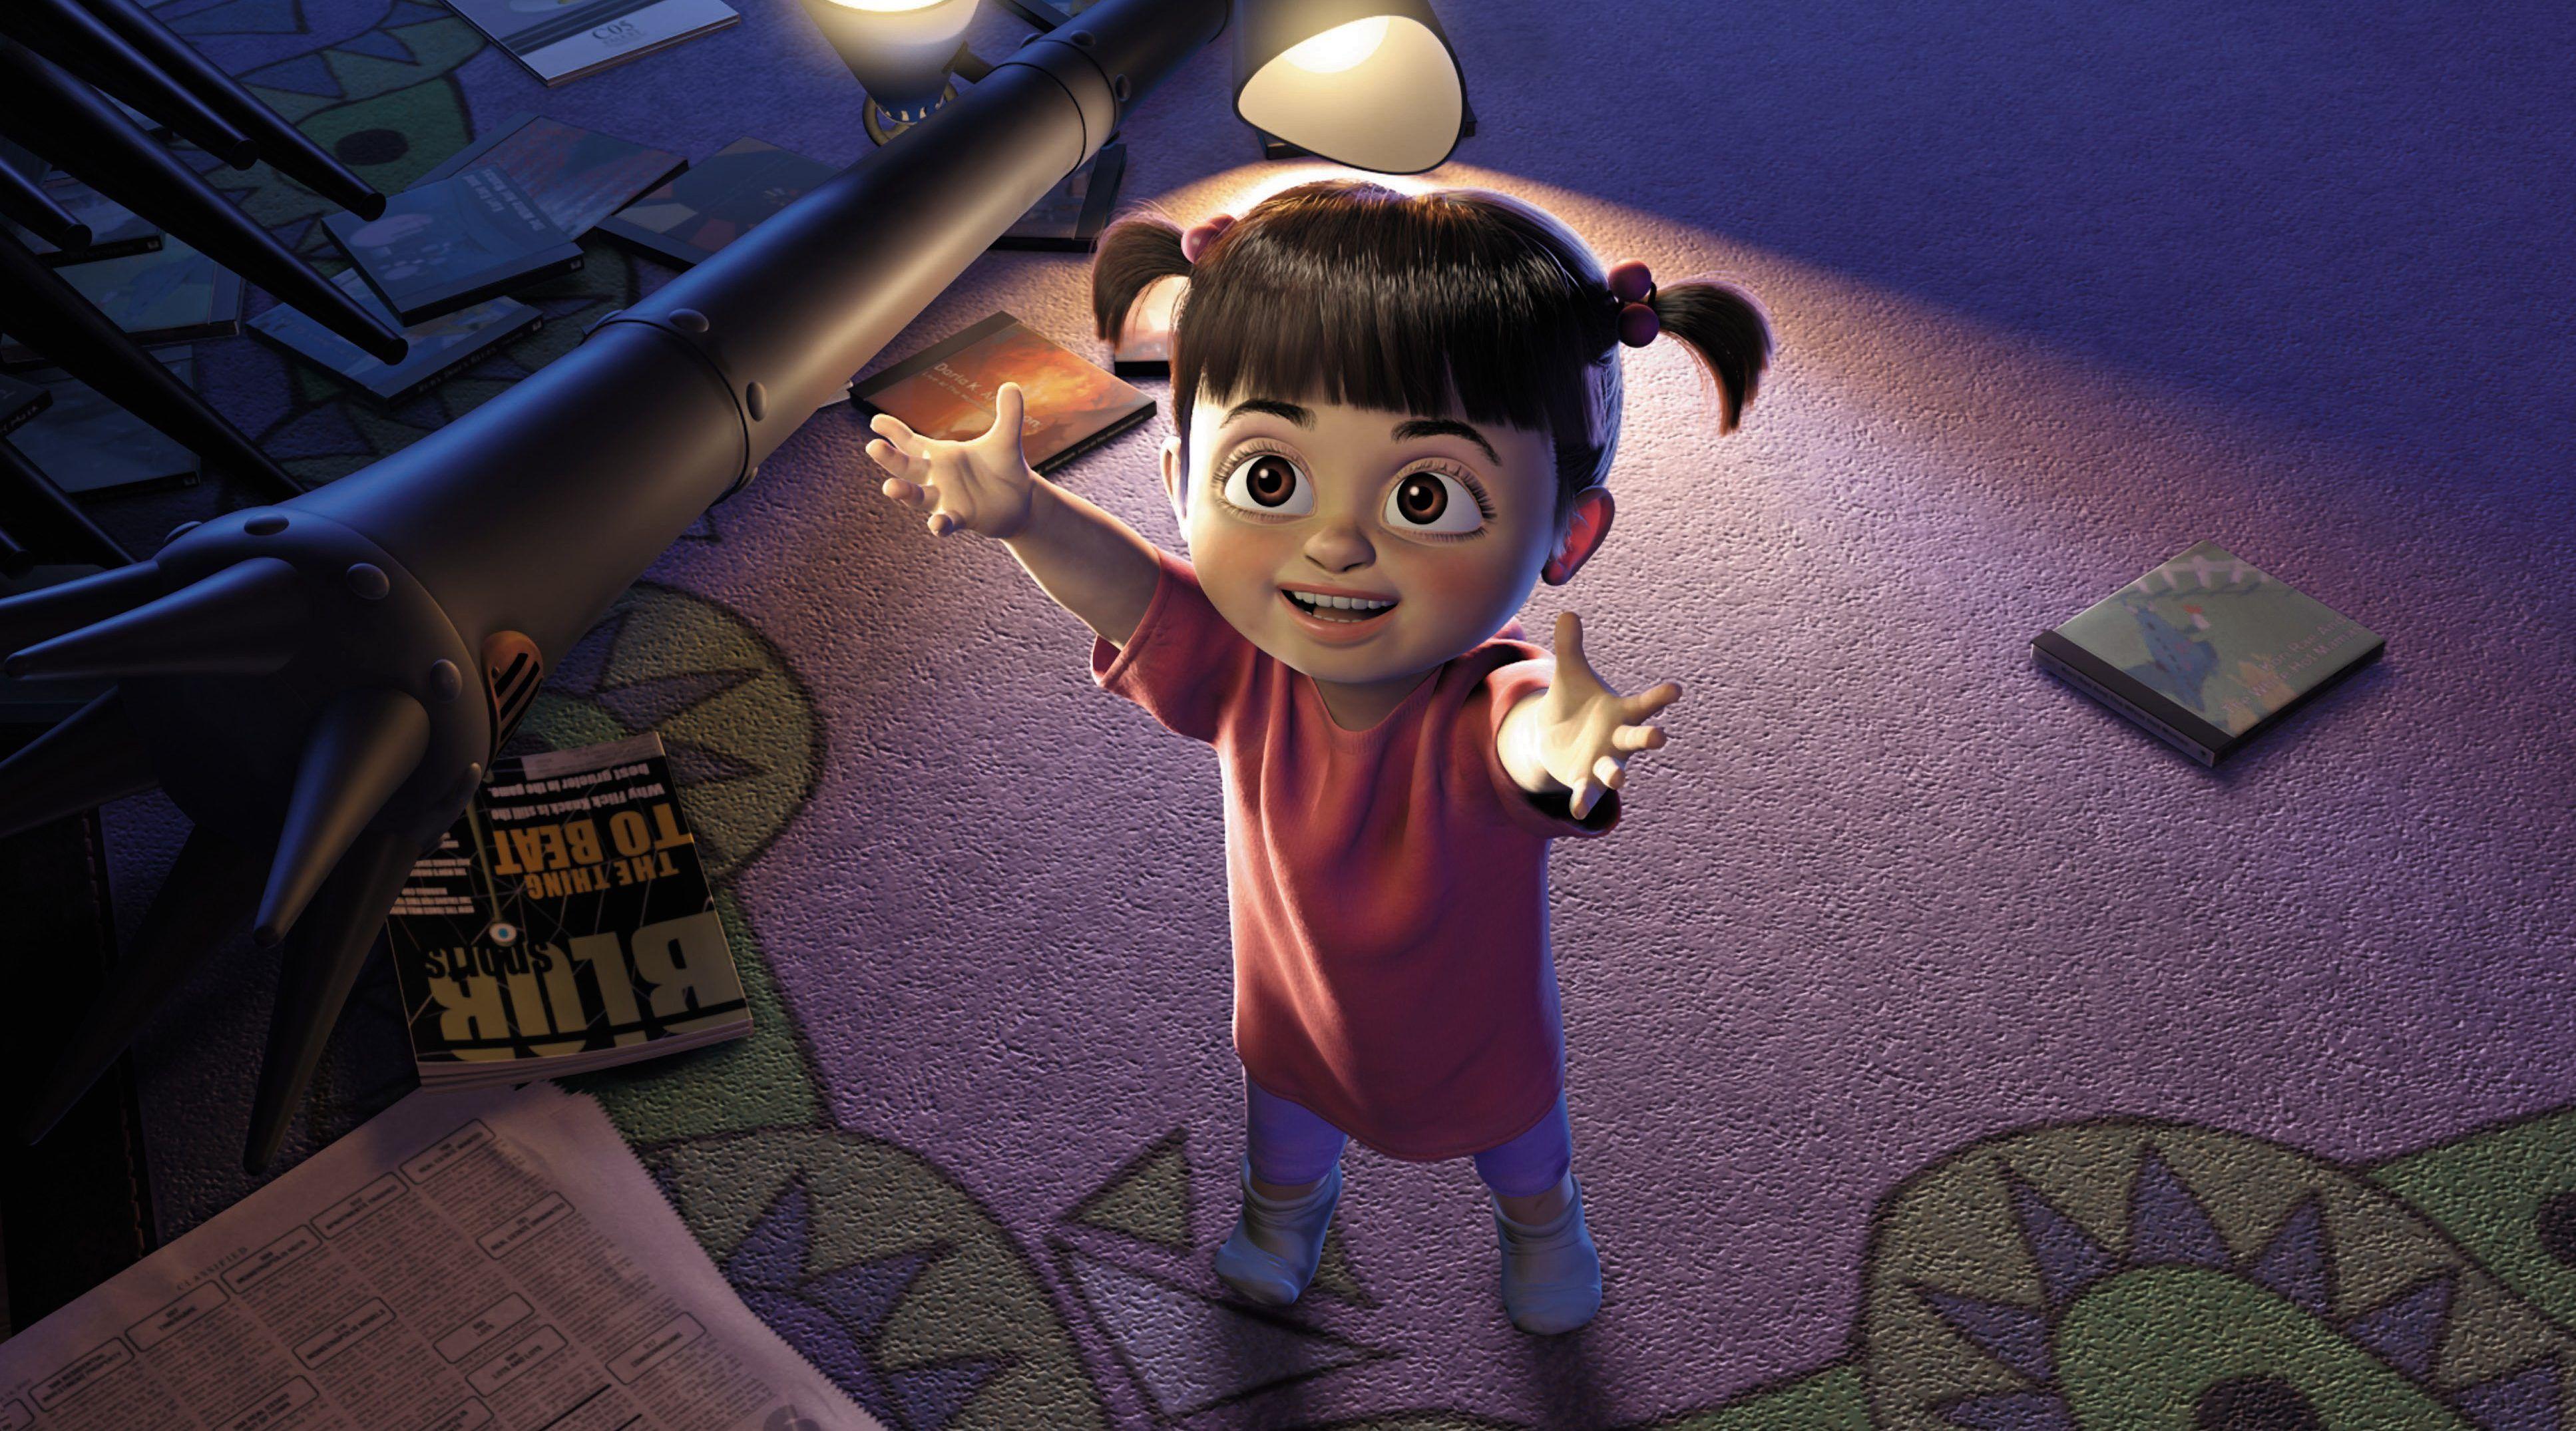 Boo Monsters Inc. Logo - Monsters Inc 3 could feature original character Boo as an adult